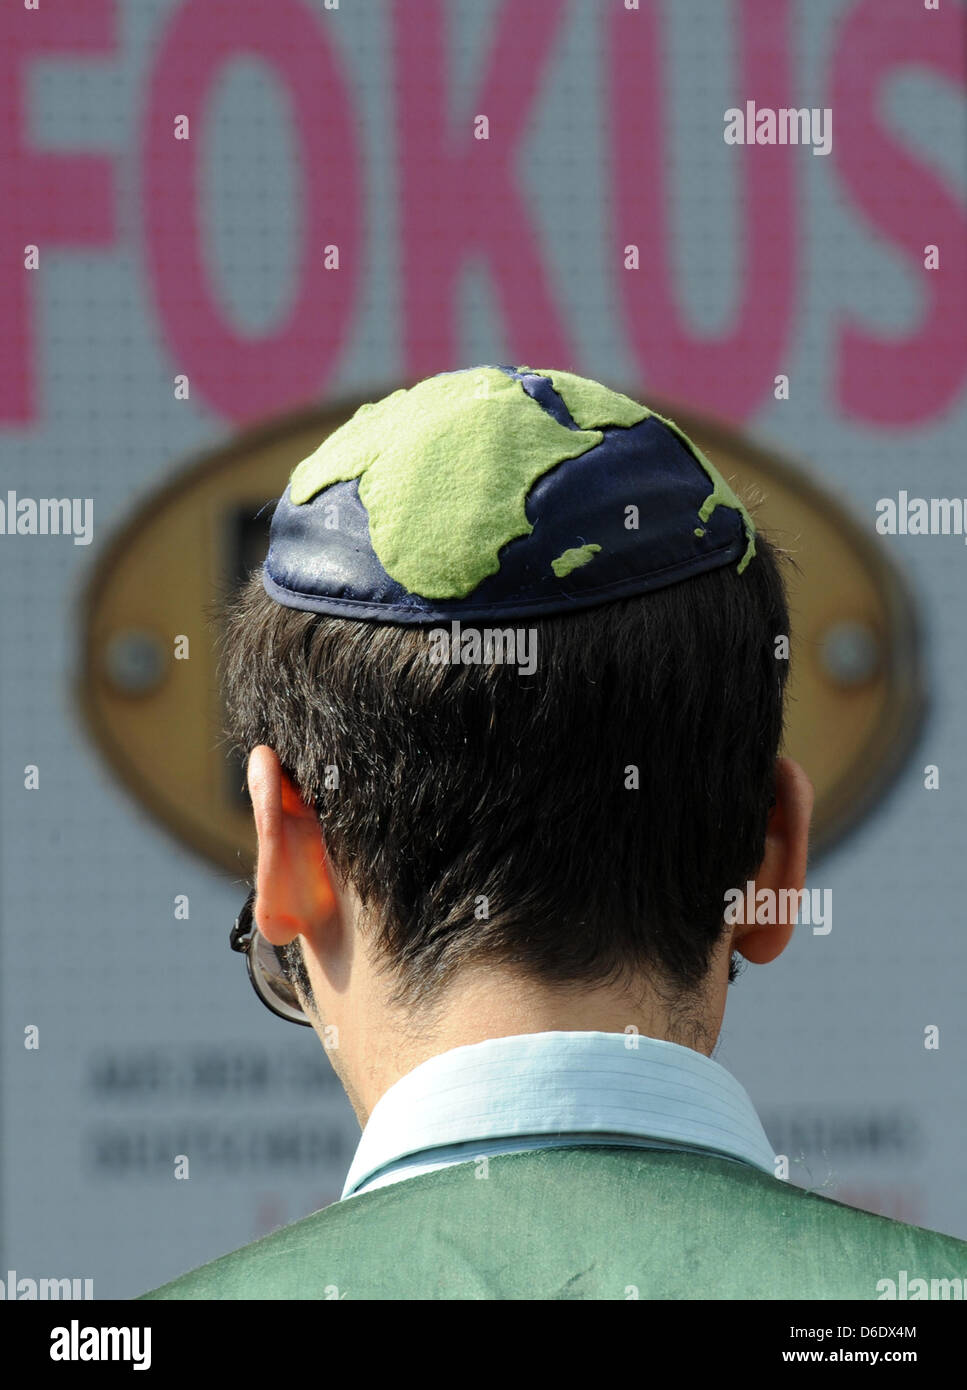 A man wearing a kippah takes part in demonstration in Berlin, Germany, 15 September 2012. The kippah walk, which was called for online, was meant to be against anti-semitism and took place for Rosh Hashanah, the Jewish New Year. Photo: BRITTA PEDERSEN Stock Photo